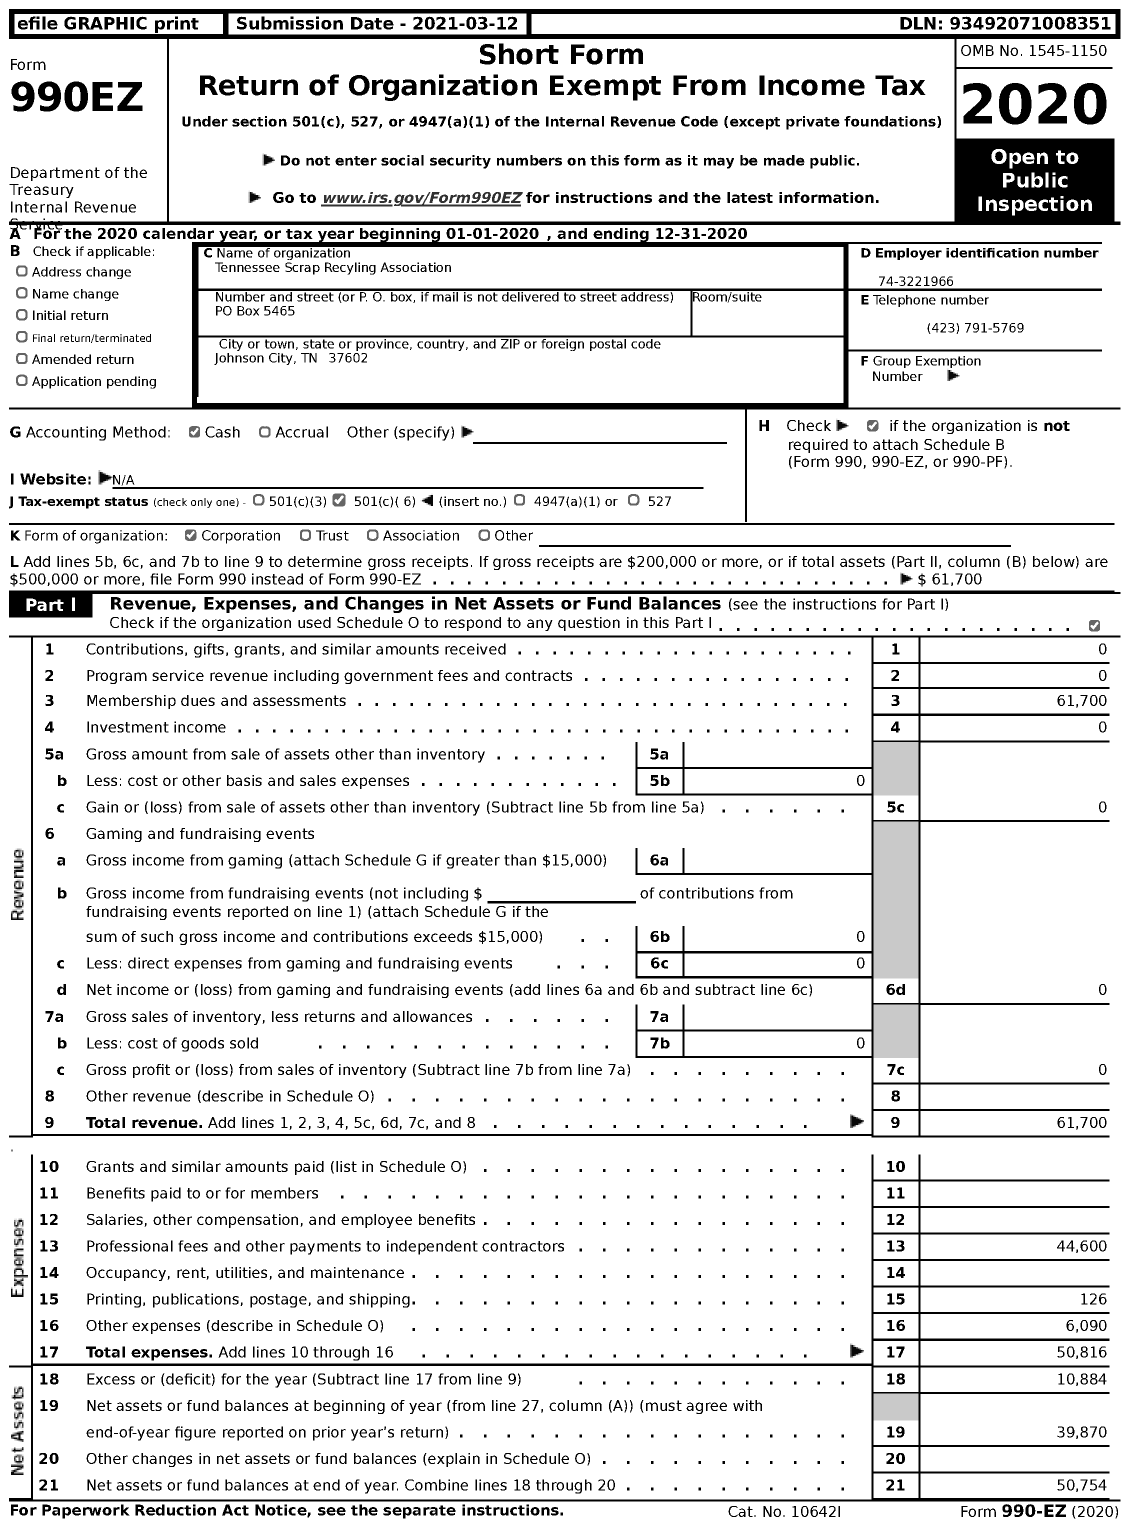 Image of first page of 2020 Form 990EZ for Tennessee Scrap Recyling Association